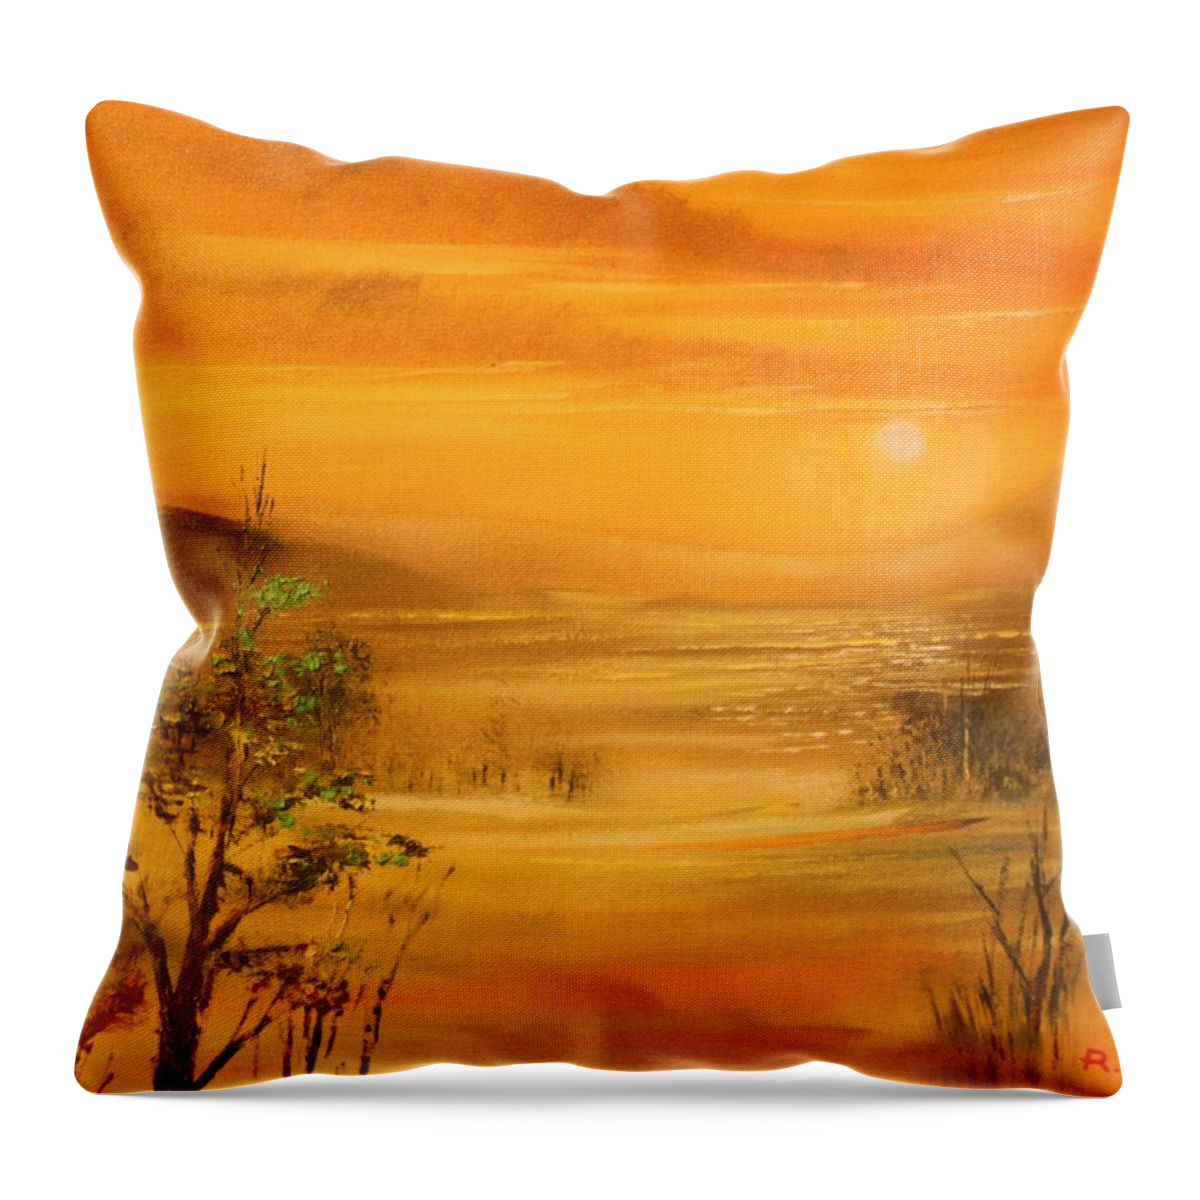 Sunset Throw Pillow featuring the painting Intense Orange by Remegio Onia